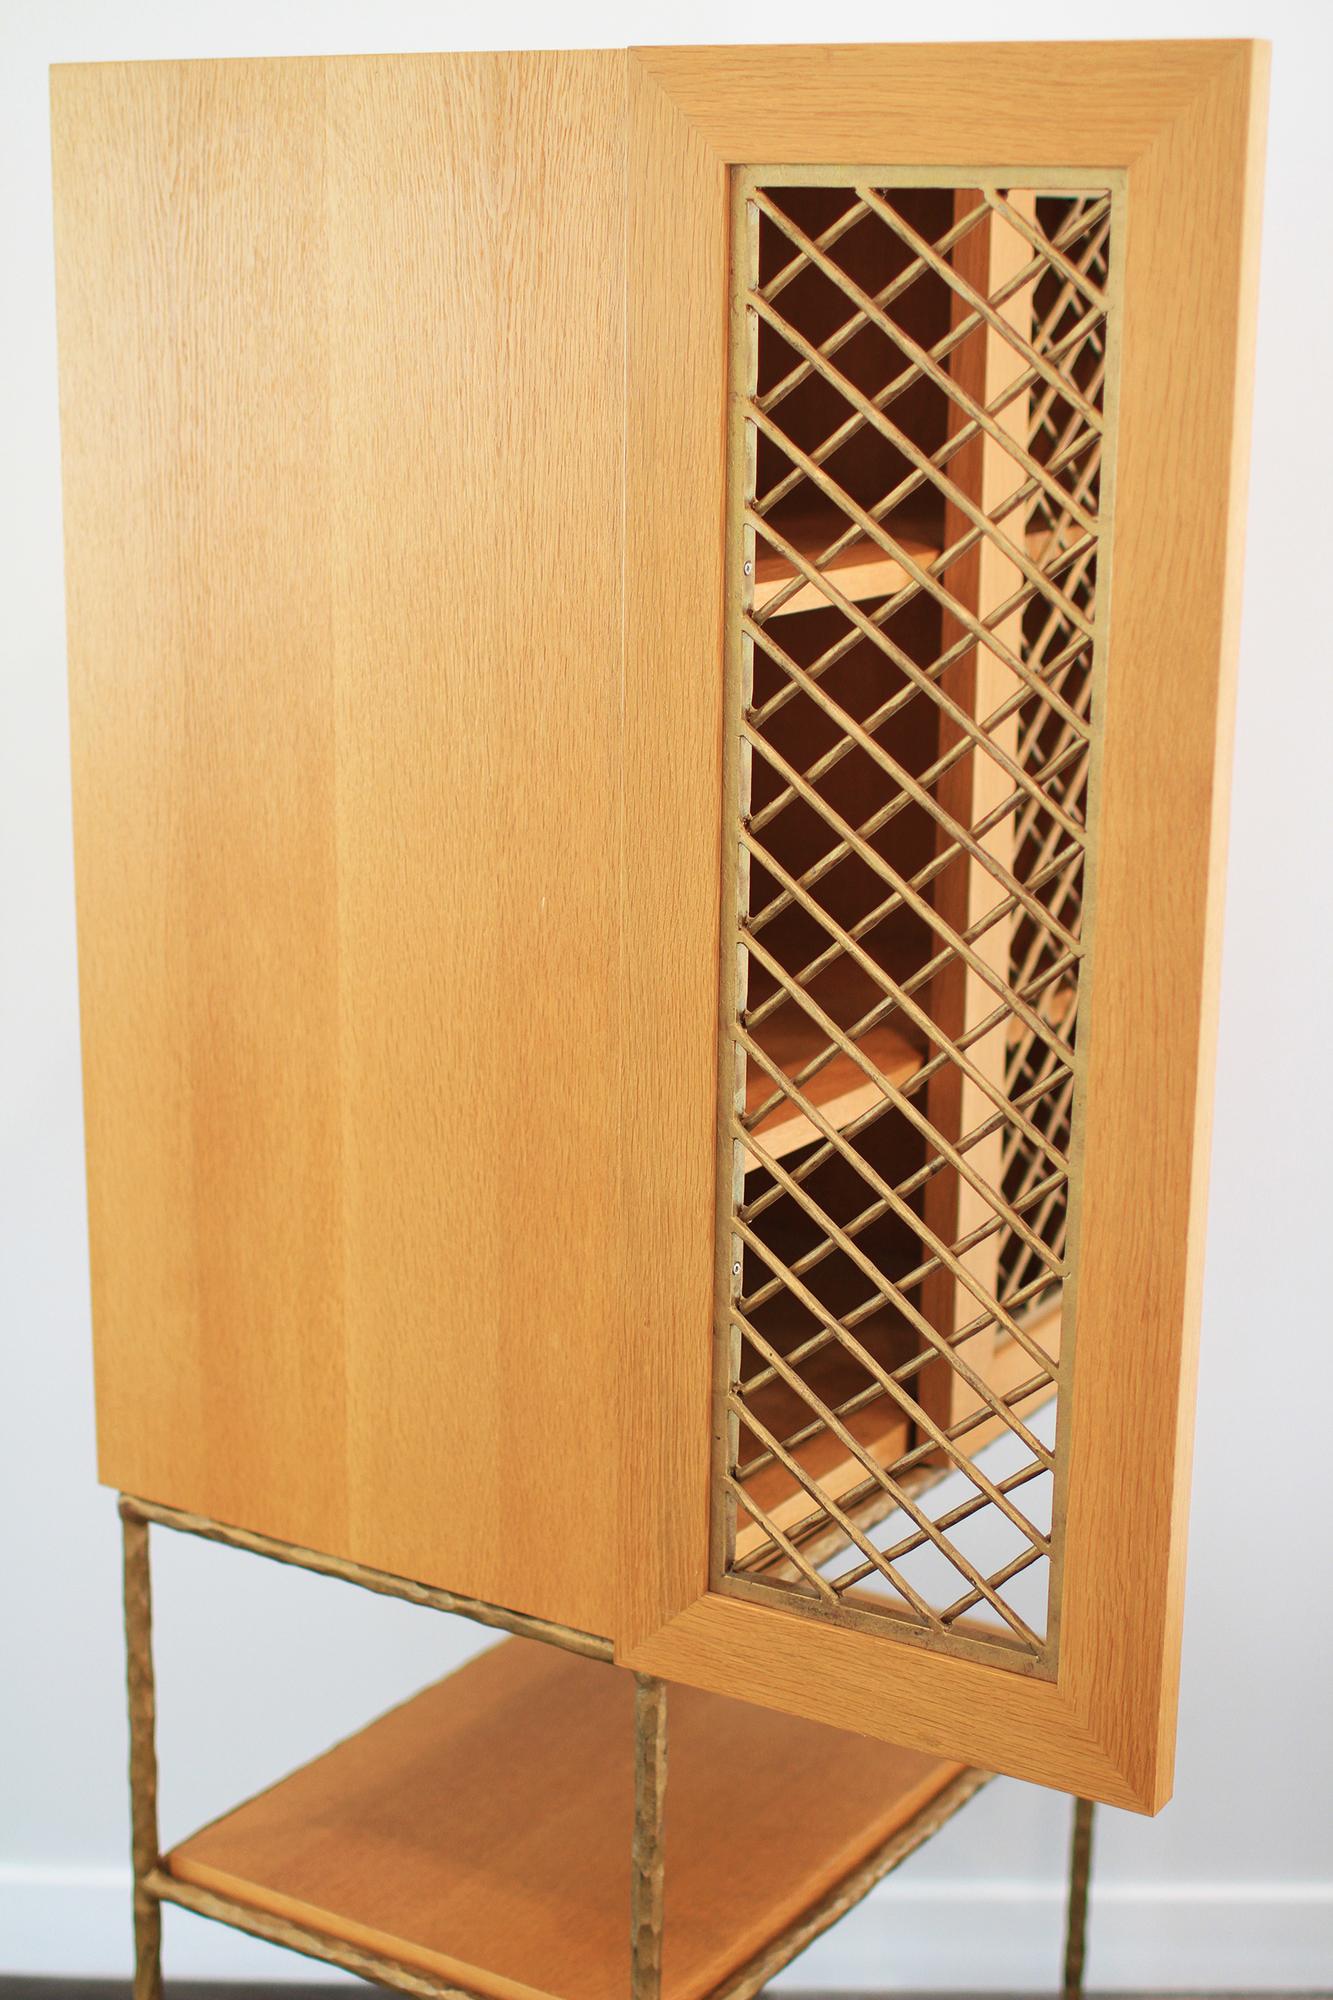 Garouste & Bonetti Cabinet, forged by Diego Giacometti's ironworker For Sale 8